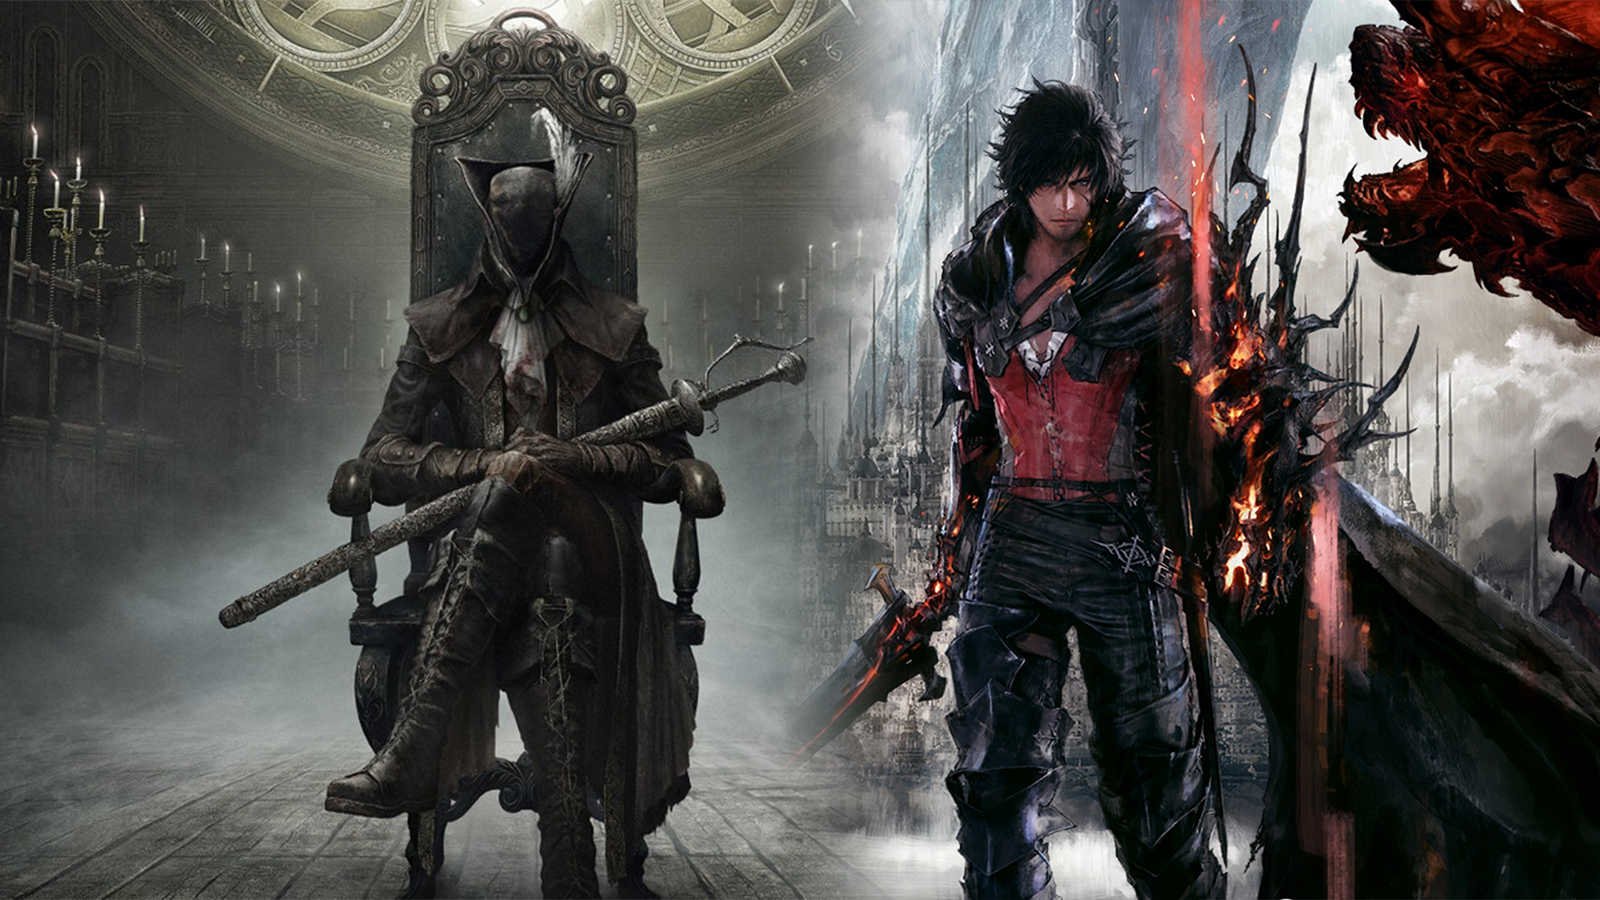 More PlayStation exclusives coming to PC - Is Bloodborne coming next?, Gaming, Entertainment